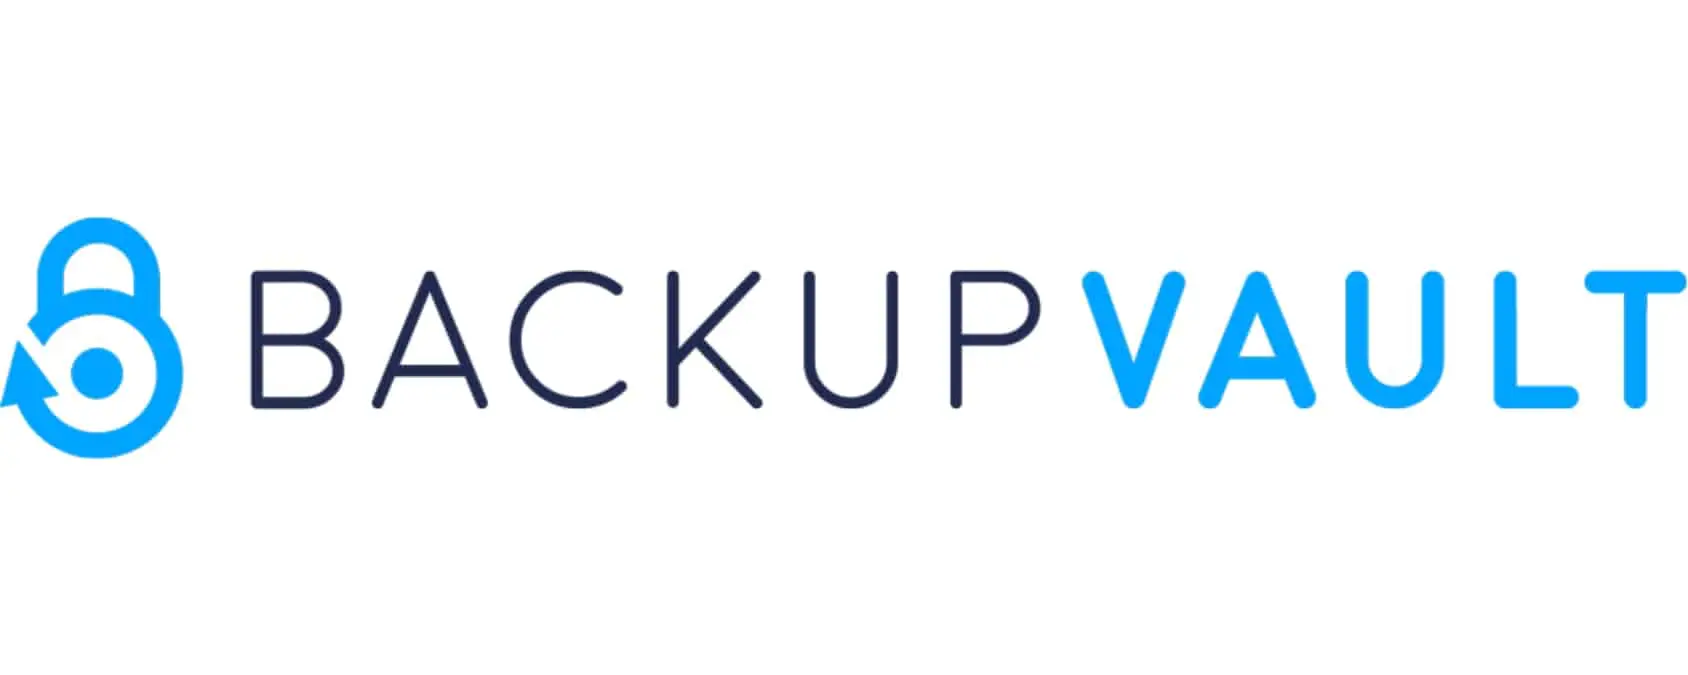 BackupVault review- Is this UK cloud backup service worth its premium price?